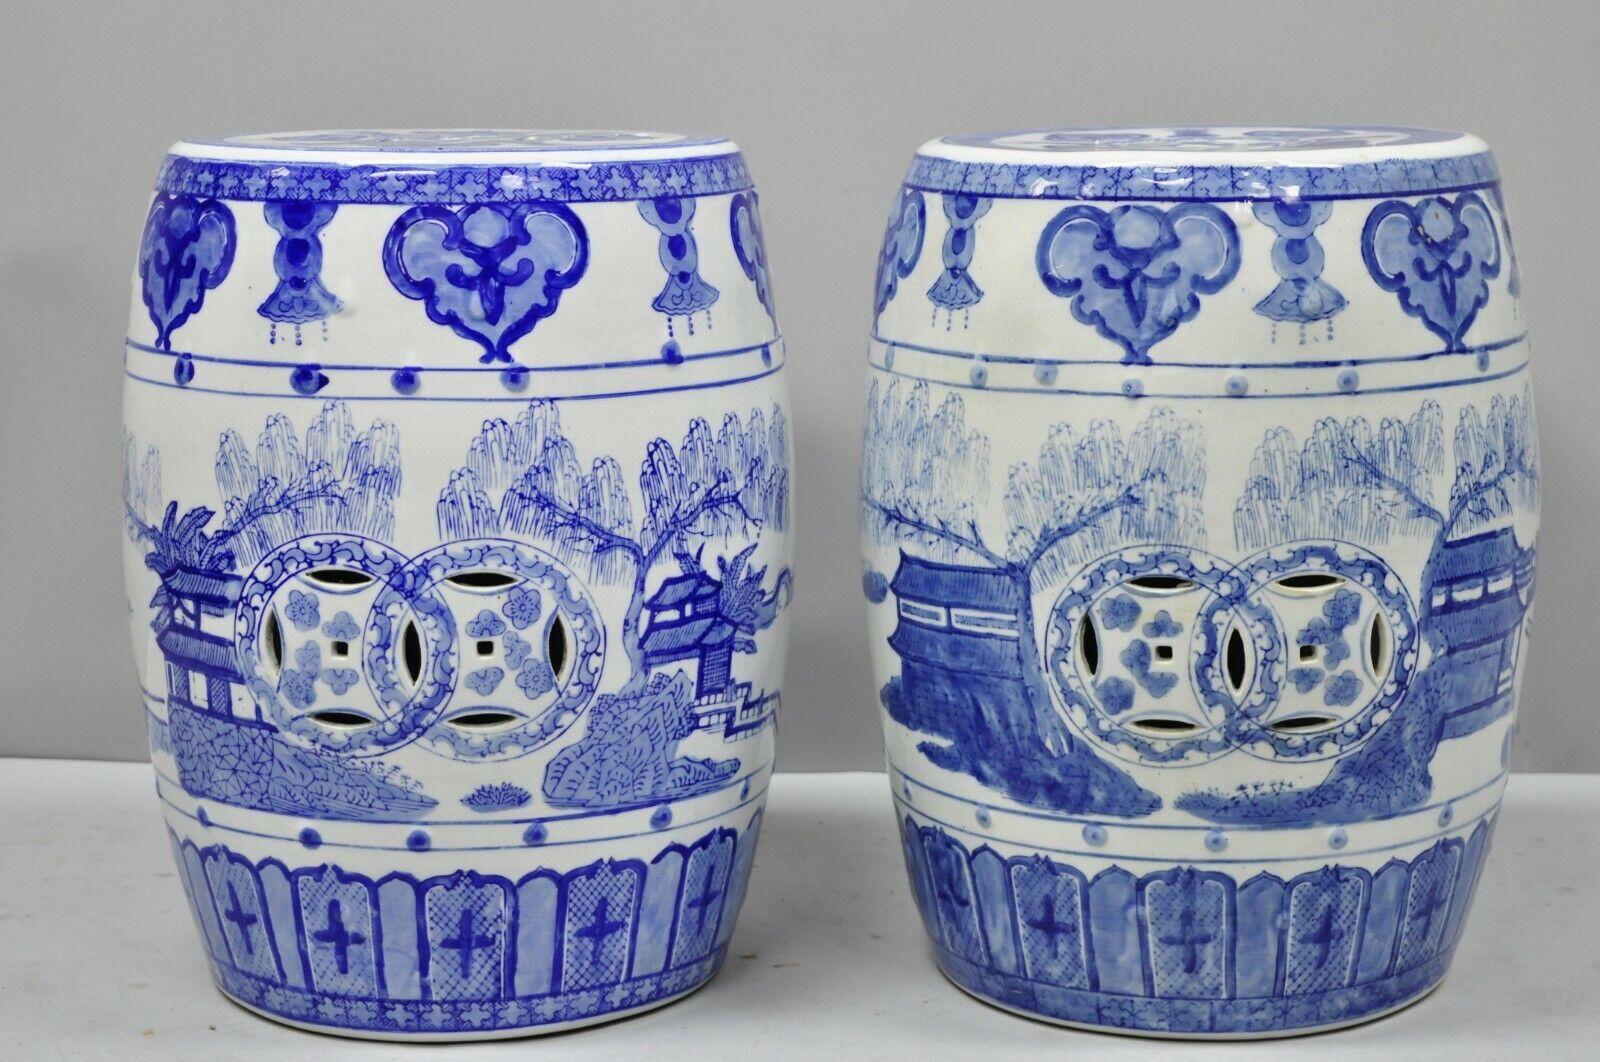 Pair of Blue & White Pierced Porcelain Chinese Drum Garden Seats. item features a porcelain construction, pierced decoration, white and blue paint glazed decoration, great style form. Believed to be 20th Century. Measurements: 17